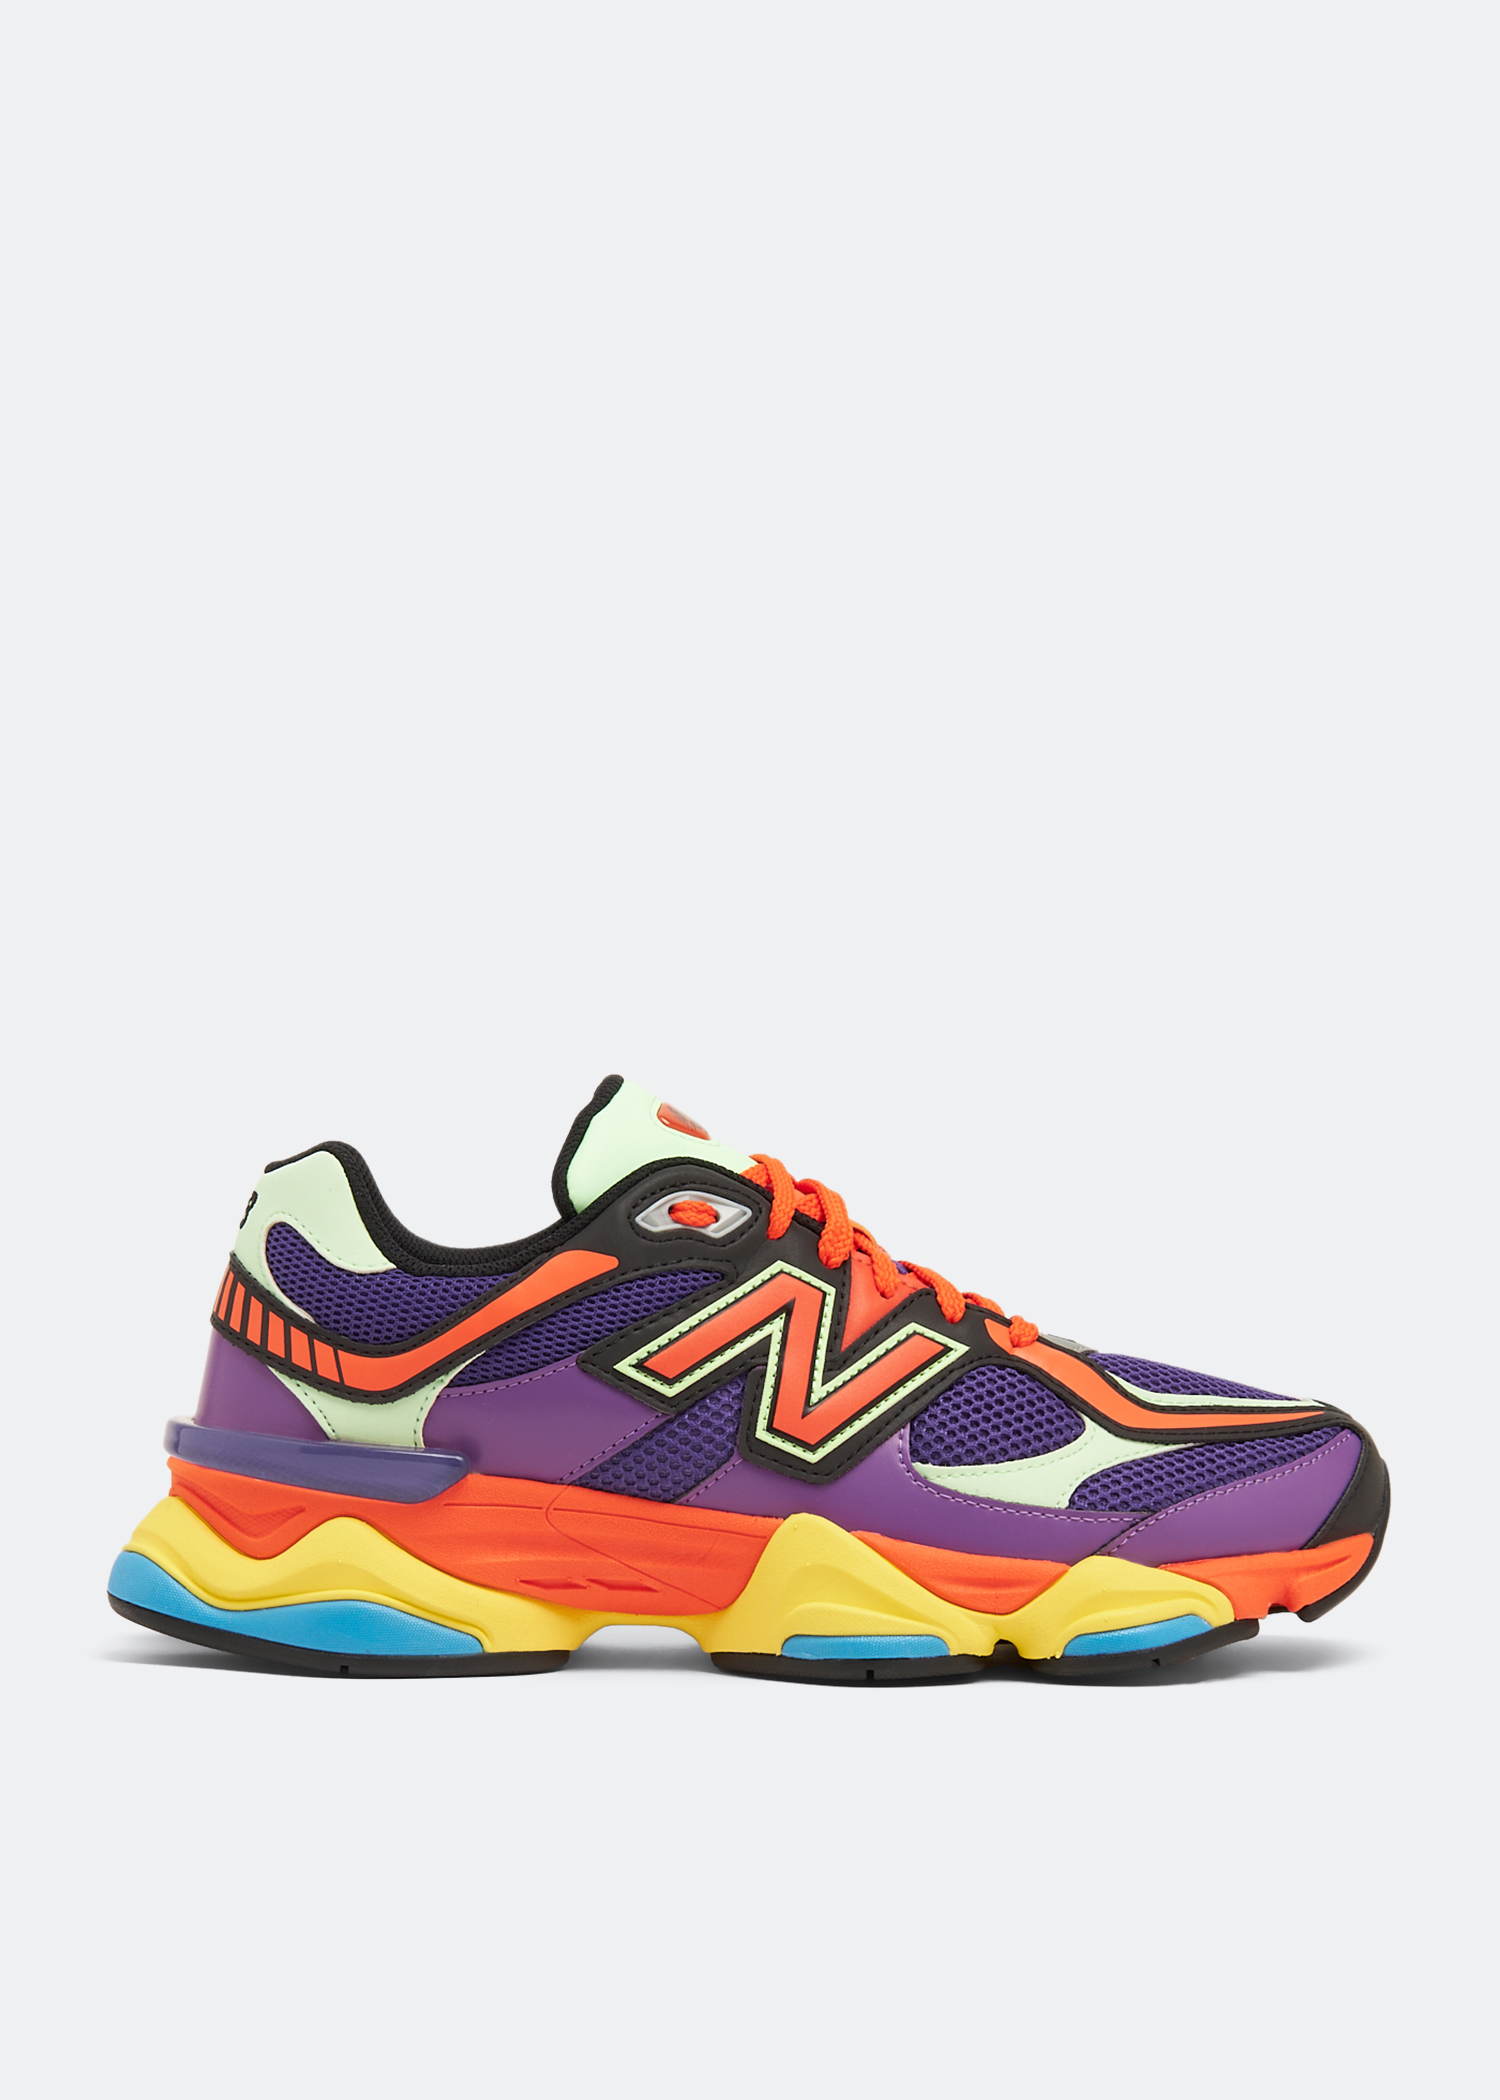 New Balance 9060 sneakers for Men - Multicolored in KSA | Level Shoes